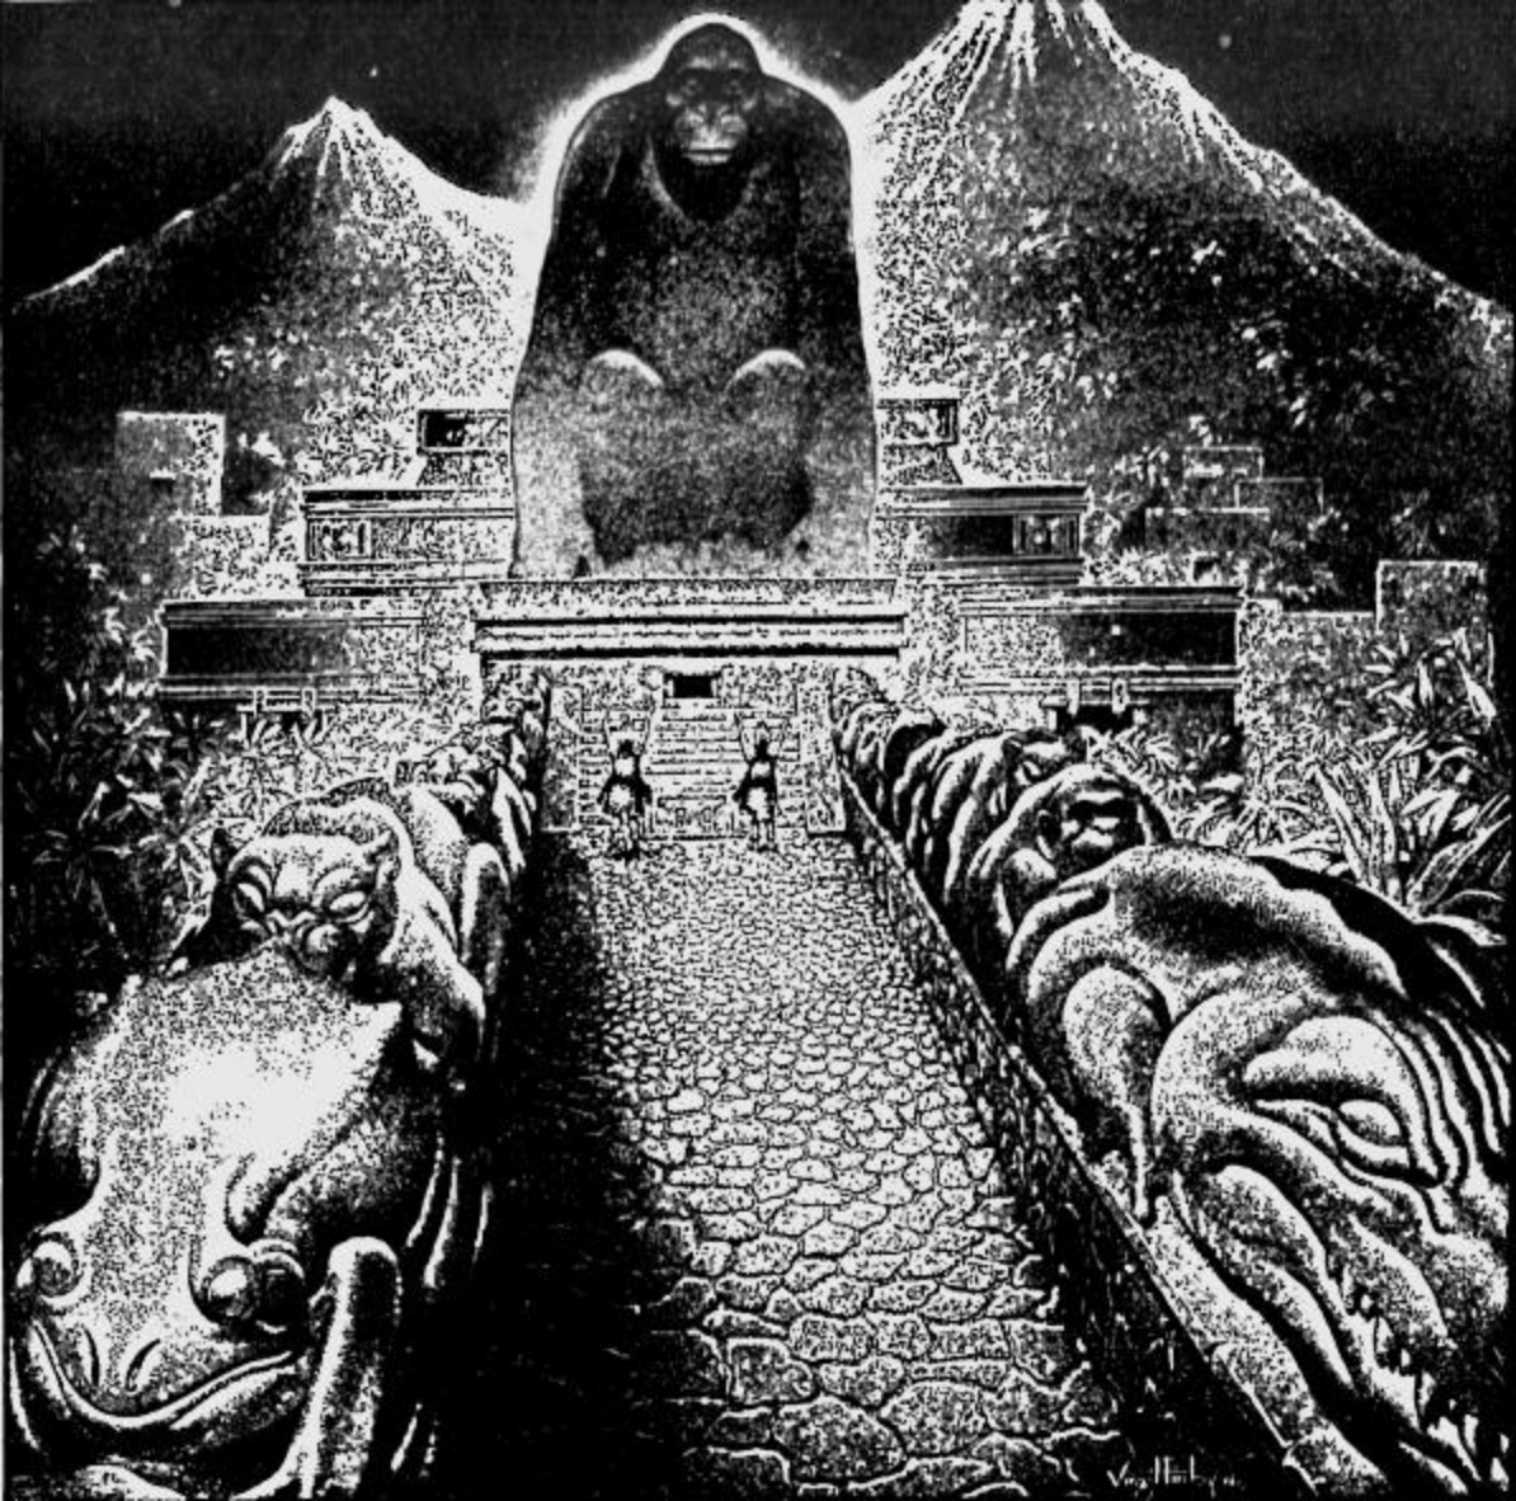 Artist Virgil Finlay's conceptional drawing of Theodore Moore's "Lost City of the Monkey God". Originally published in The American Weekly, September 22, 1940